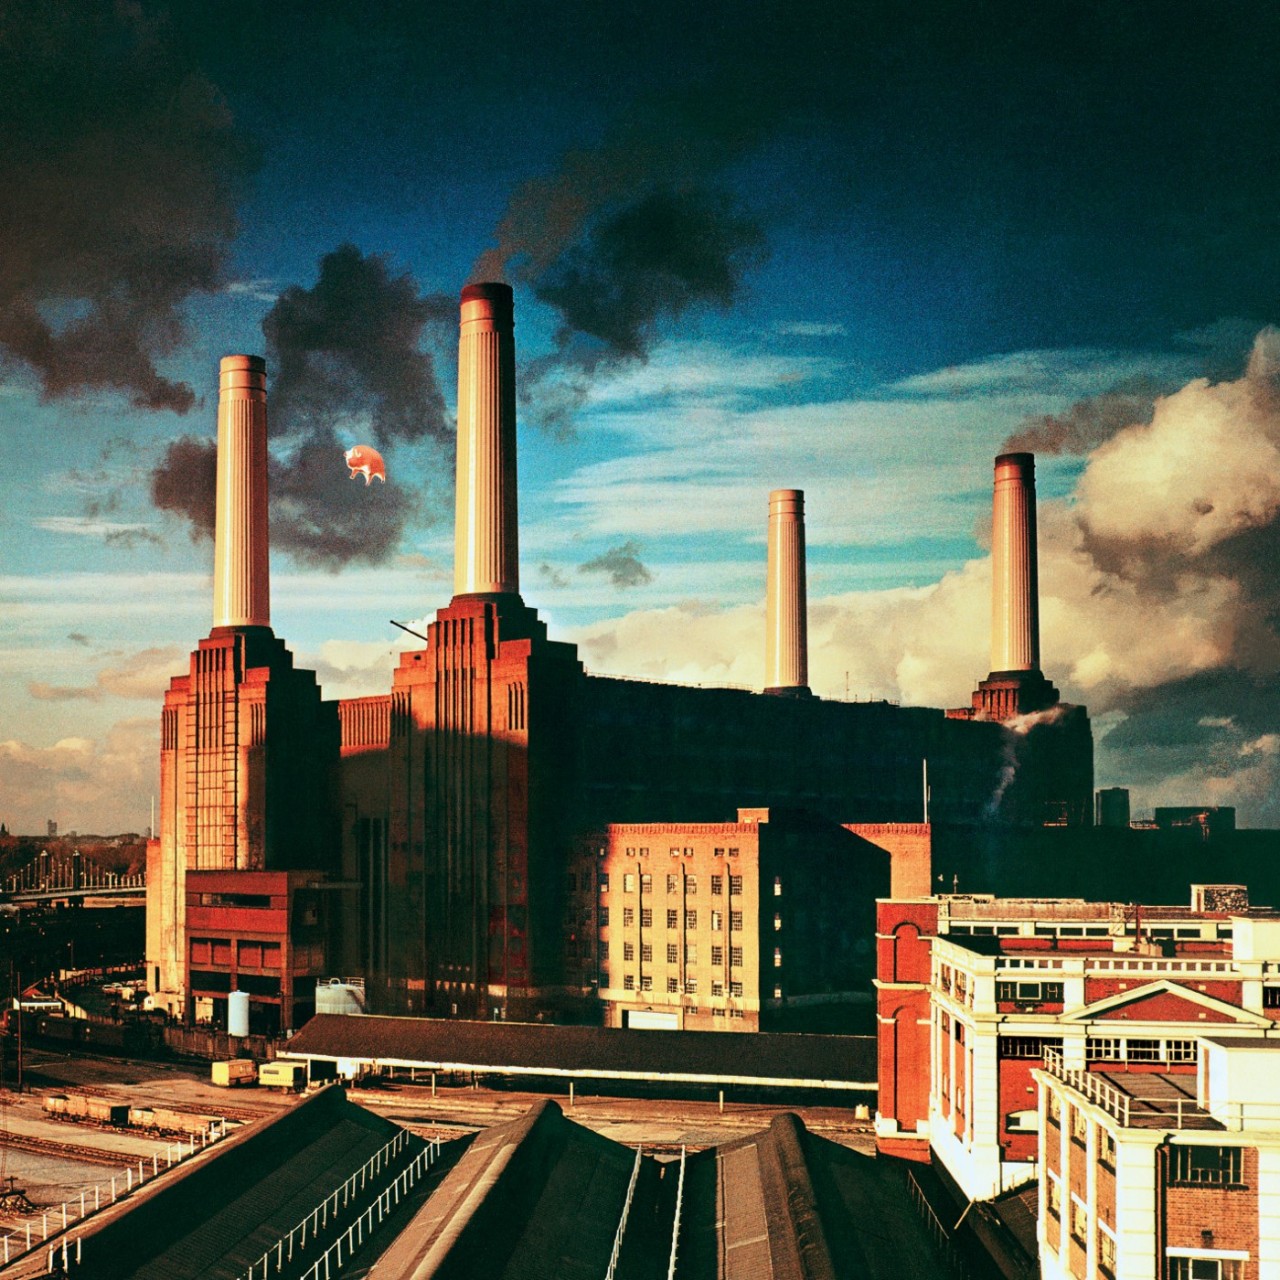 'It's scaring my cows': Remembering when Pink Floyd's giant inflatable pig broke free